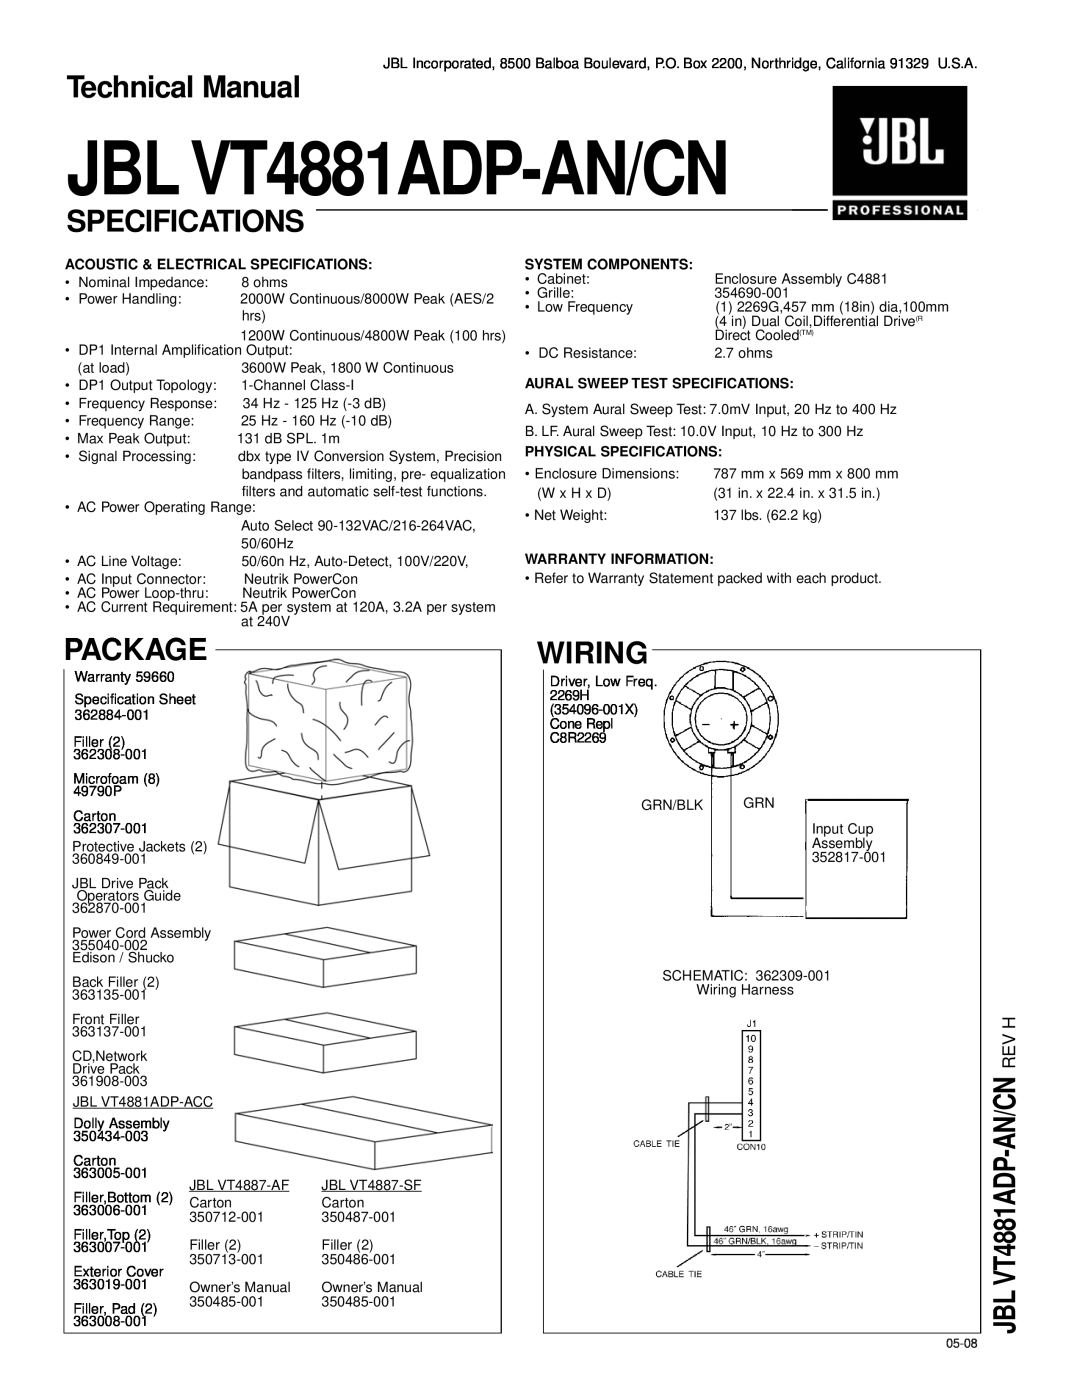 JBL technical manual Technical Manual, Specifications, Package, Wiring, JBL VT4881ADP-AN/CN REV H, System Components 